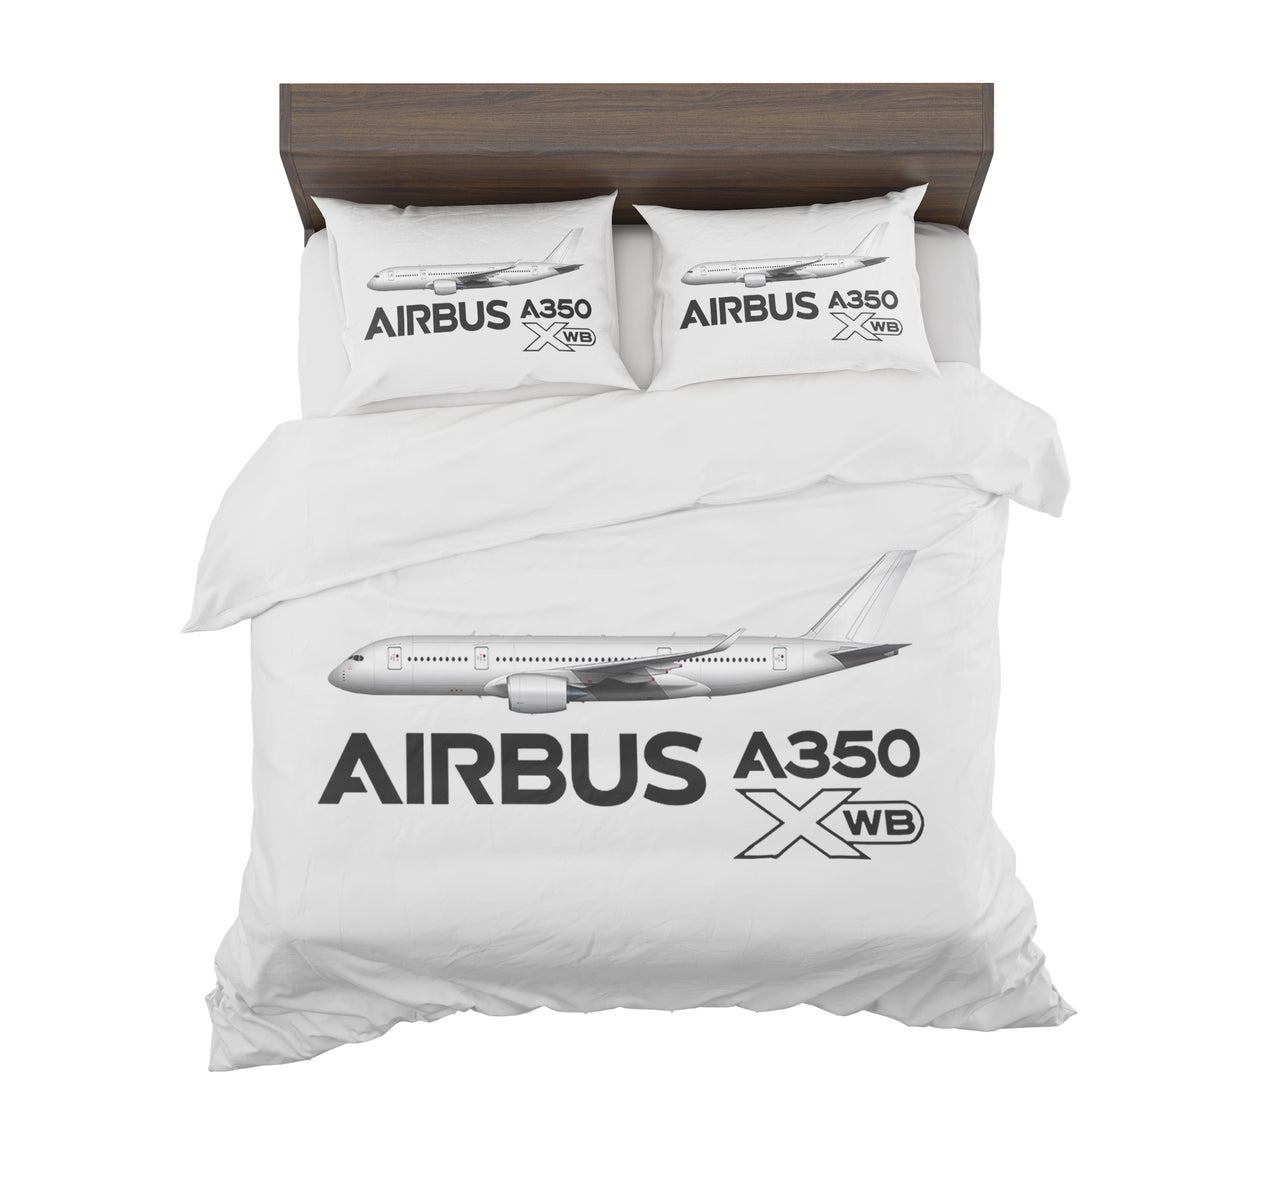 The Airbus A350 WXB Designed Bedding Sets